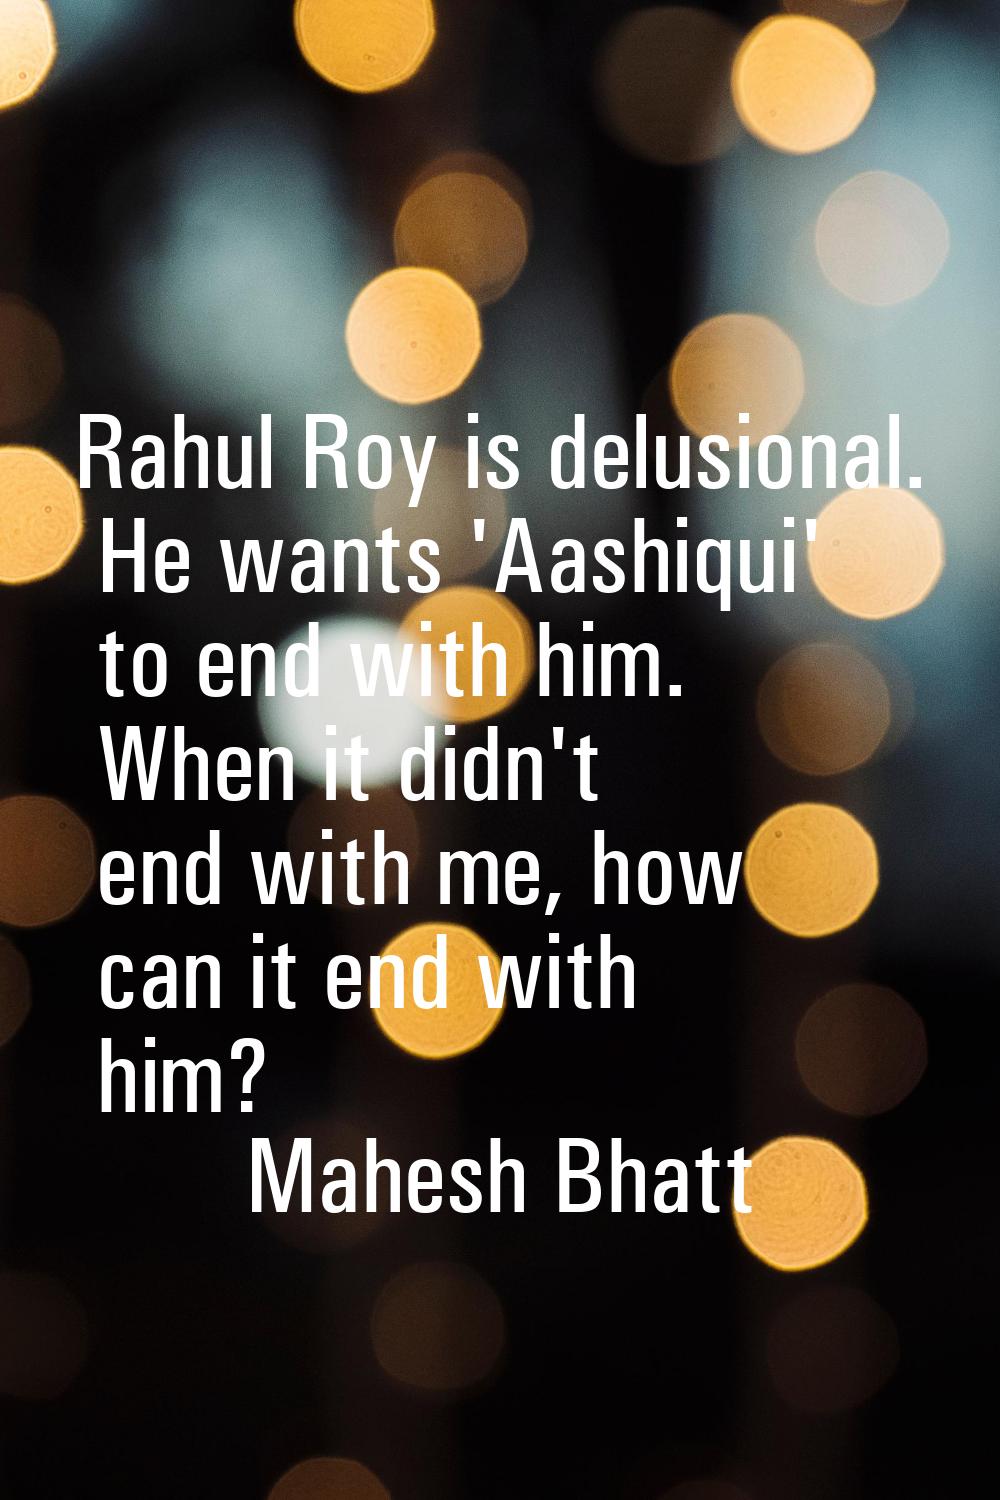 Rahul Roy is delusional. He wants 'Aashiqui' to end with him. When it didn't end with me, how can i